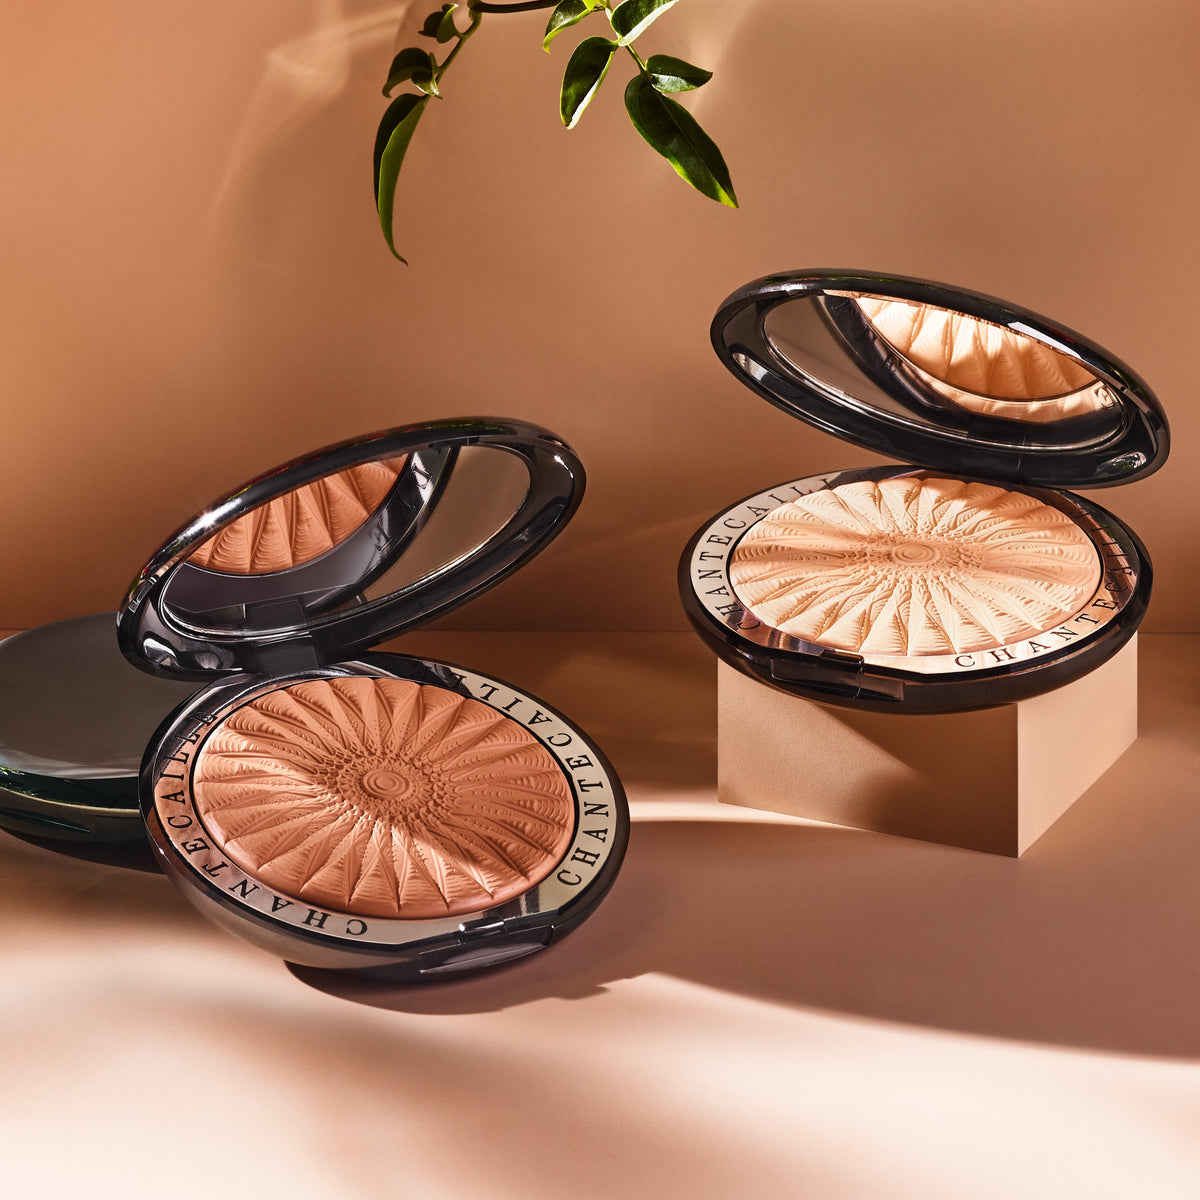 Chantecaille Perfect Blur Finishing Powder . This product is in the color bronze, for medium and deep complexions